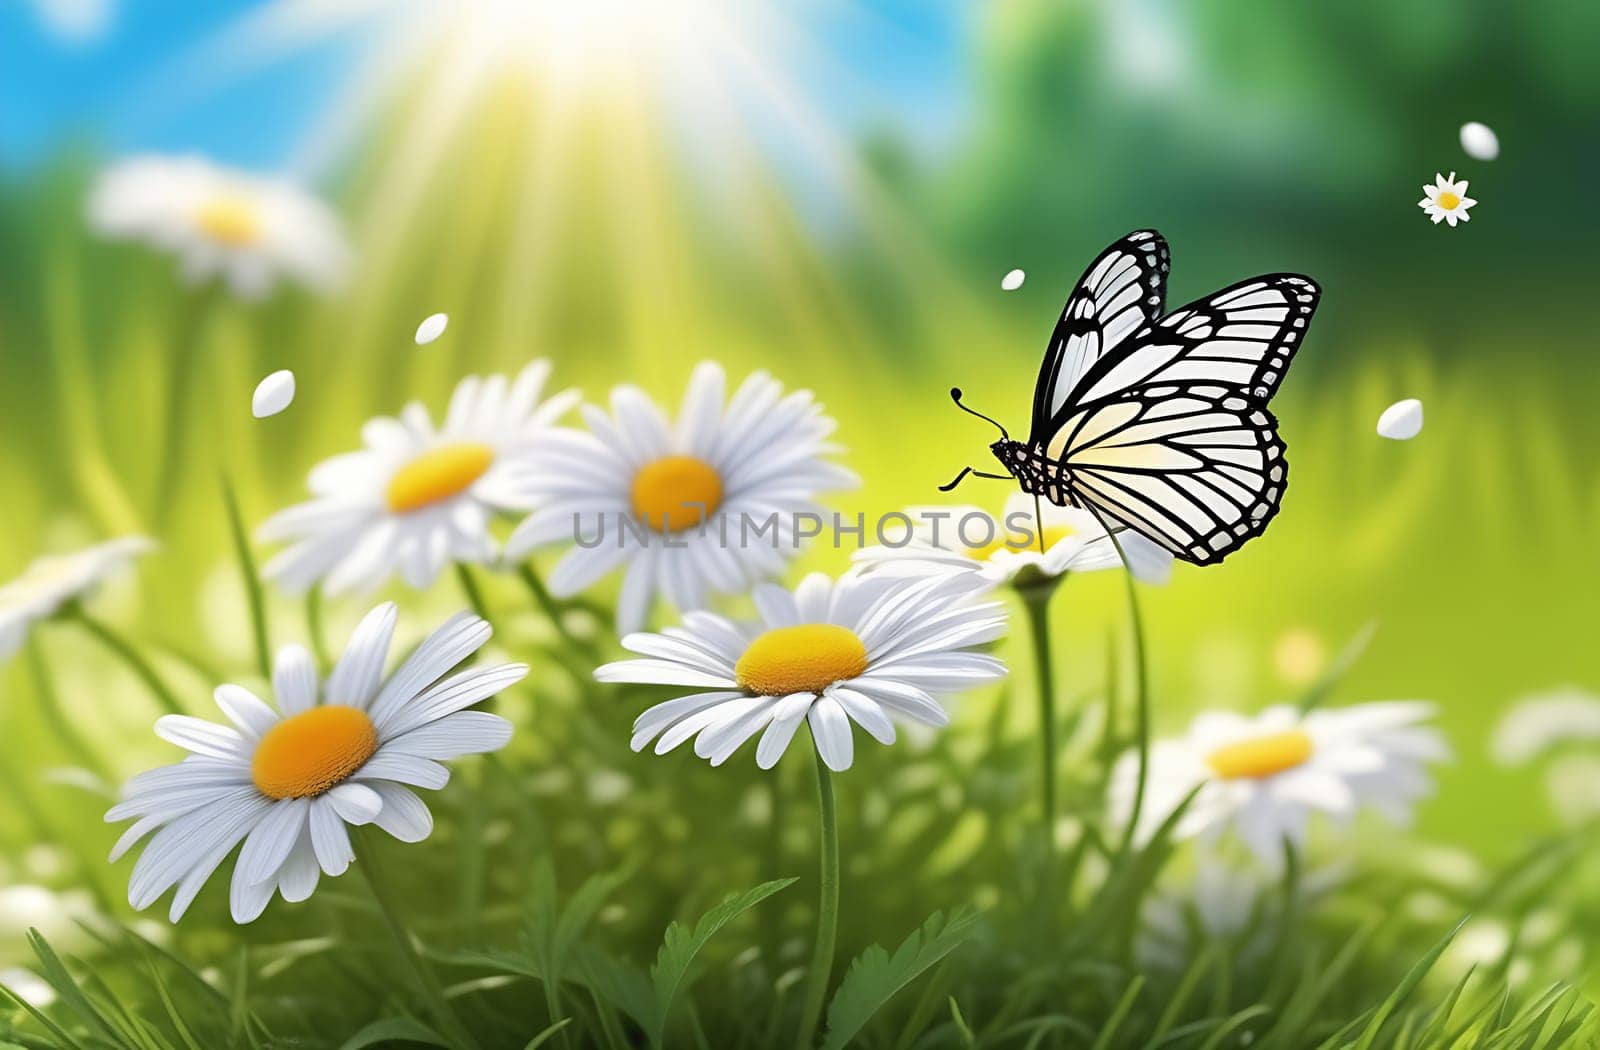 Cute summer illustration of a summer meadow, a butterfly sitting on a daisy flower, sunlight on a blue sky background, close-up.